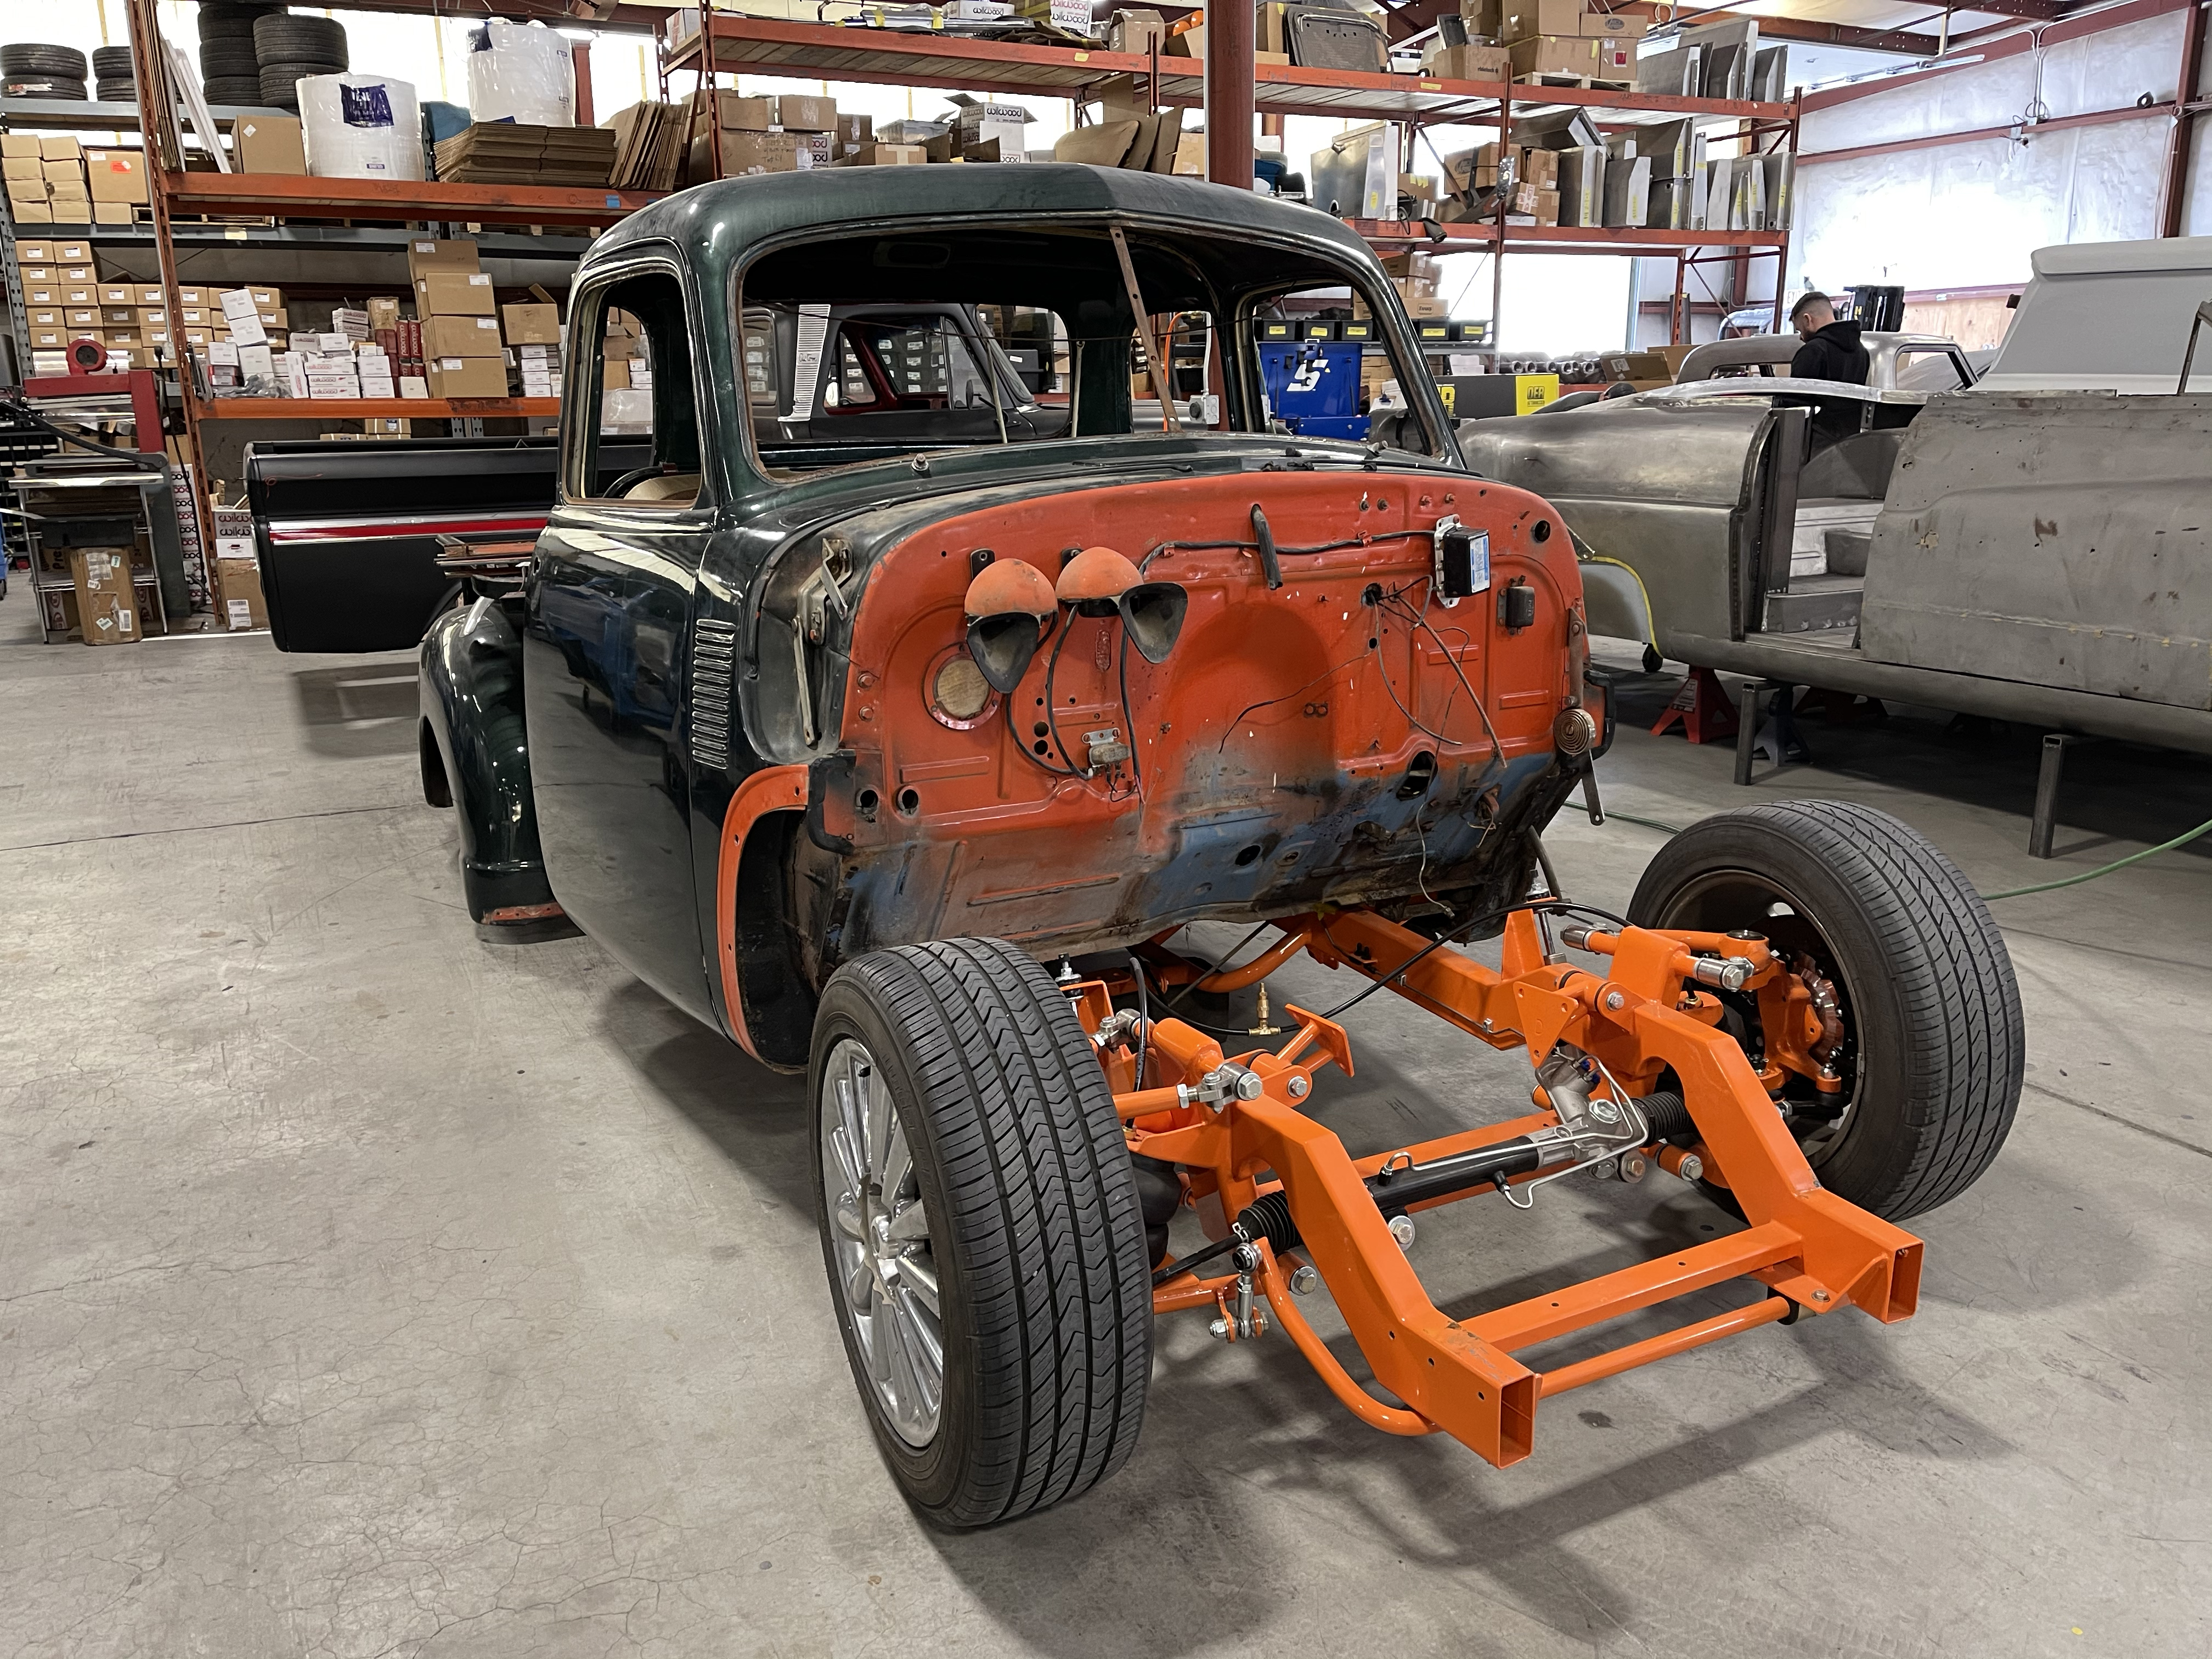 scotts-hotrods-50-chevy-project-truck-2